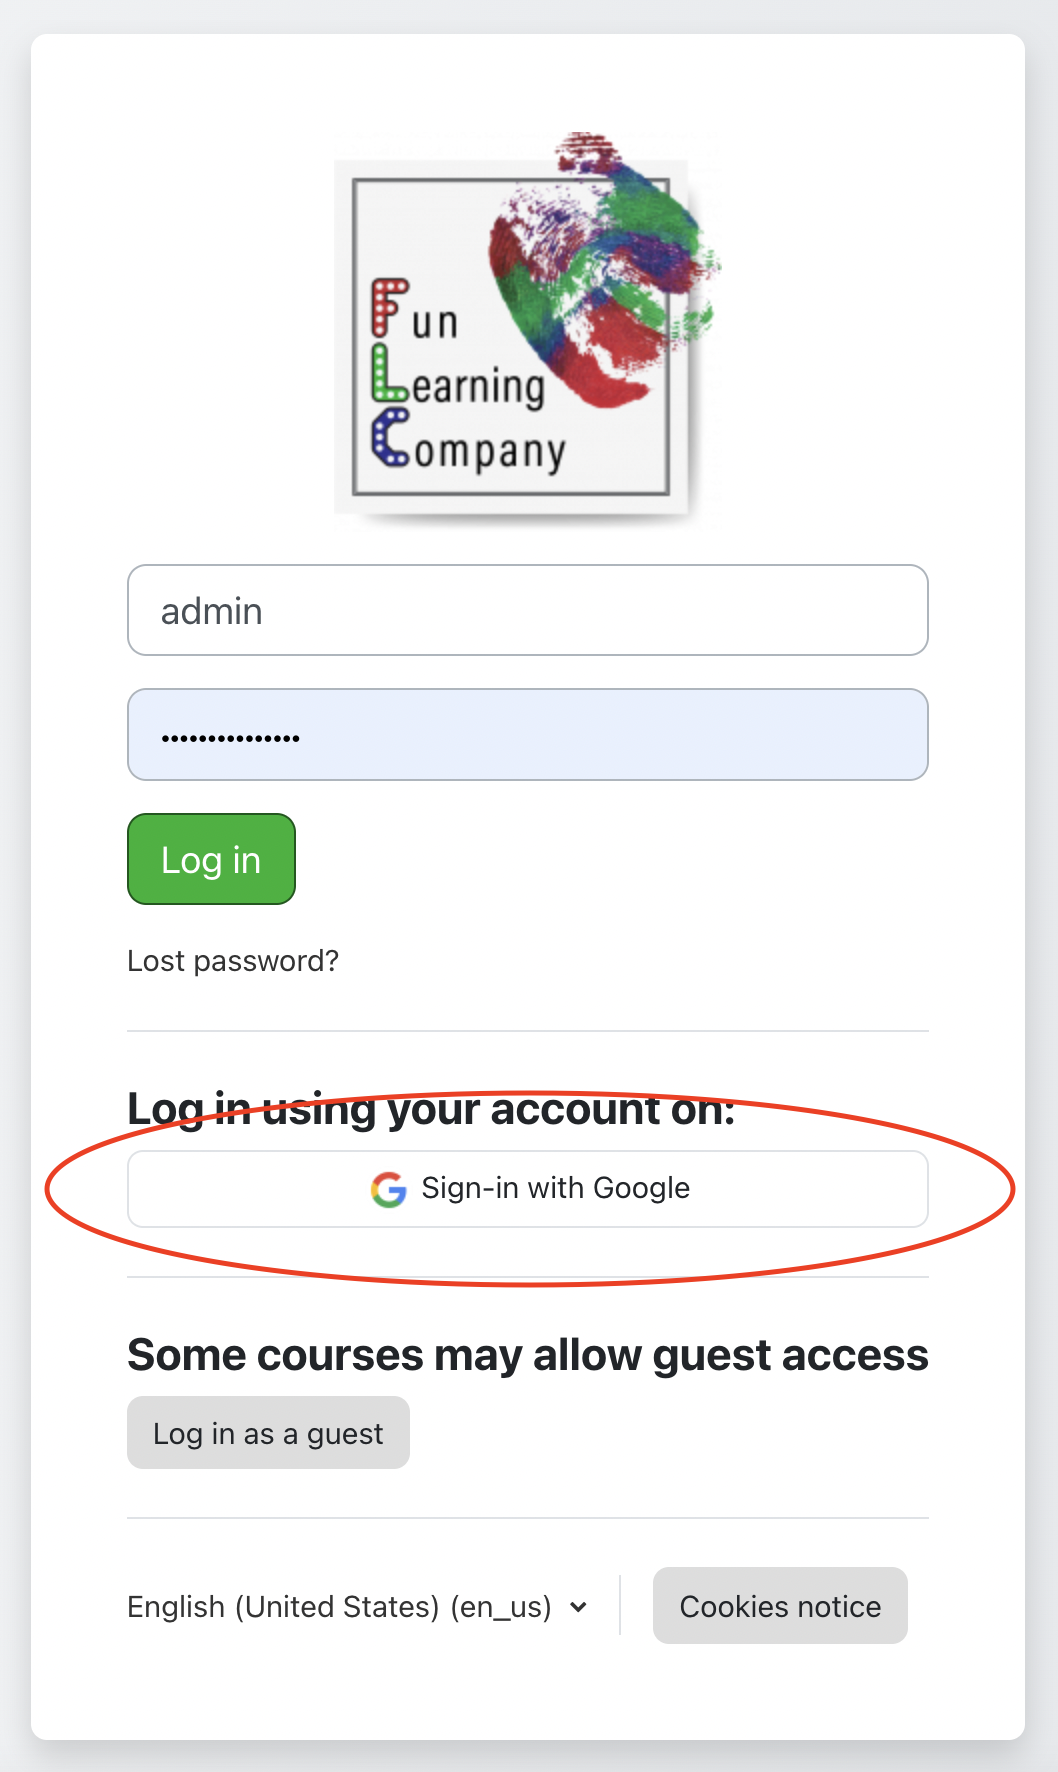 How to sign in with Google